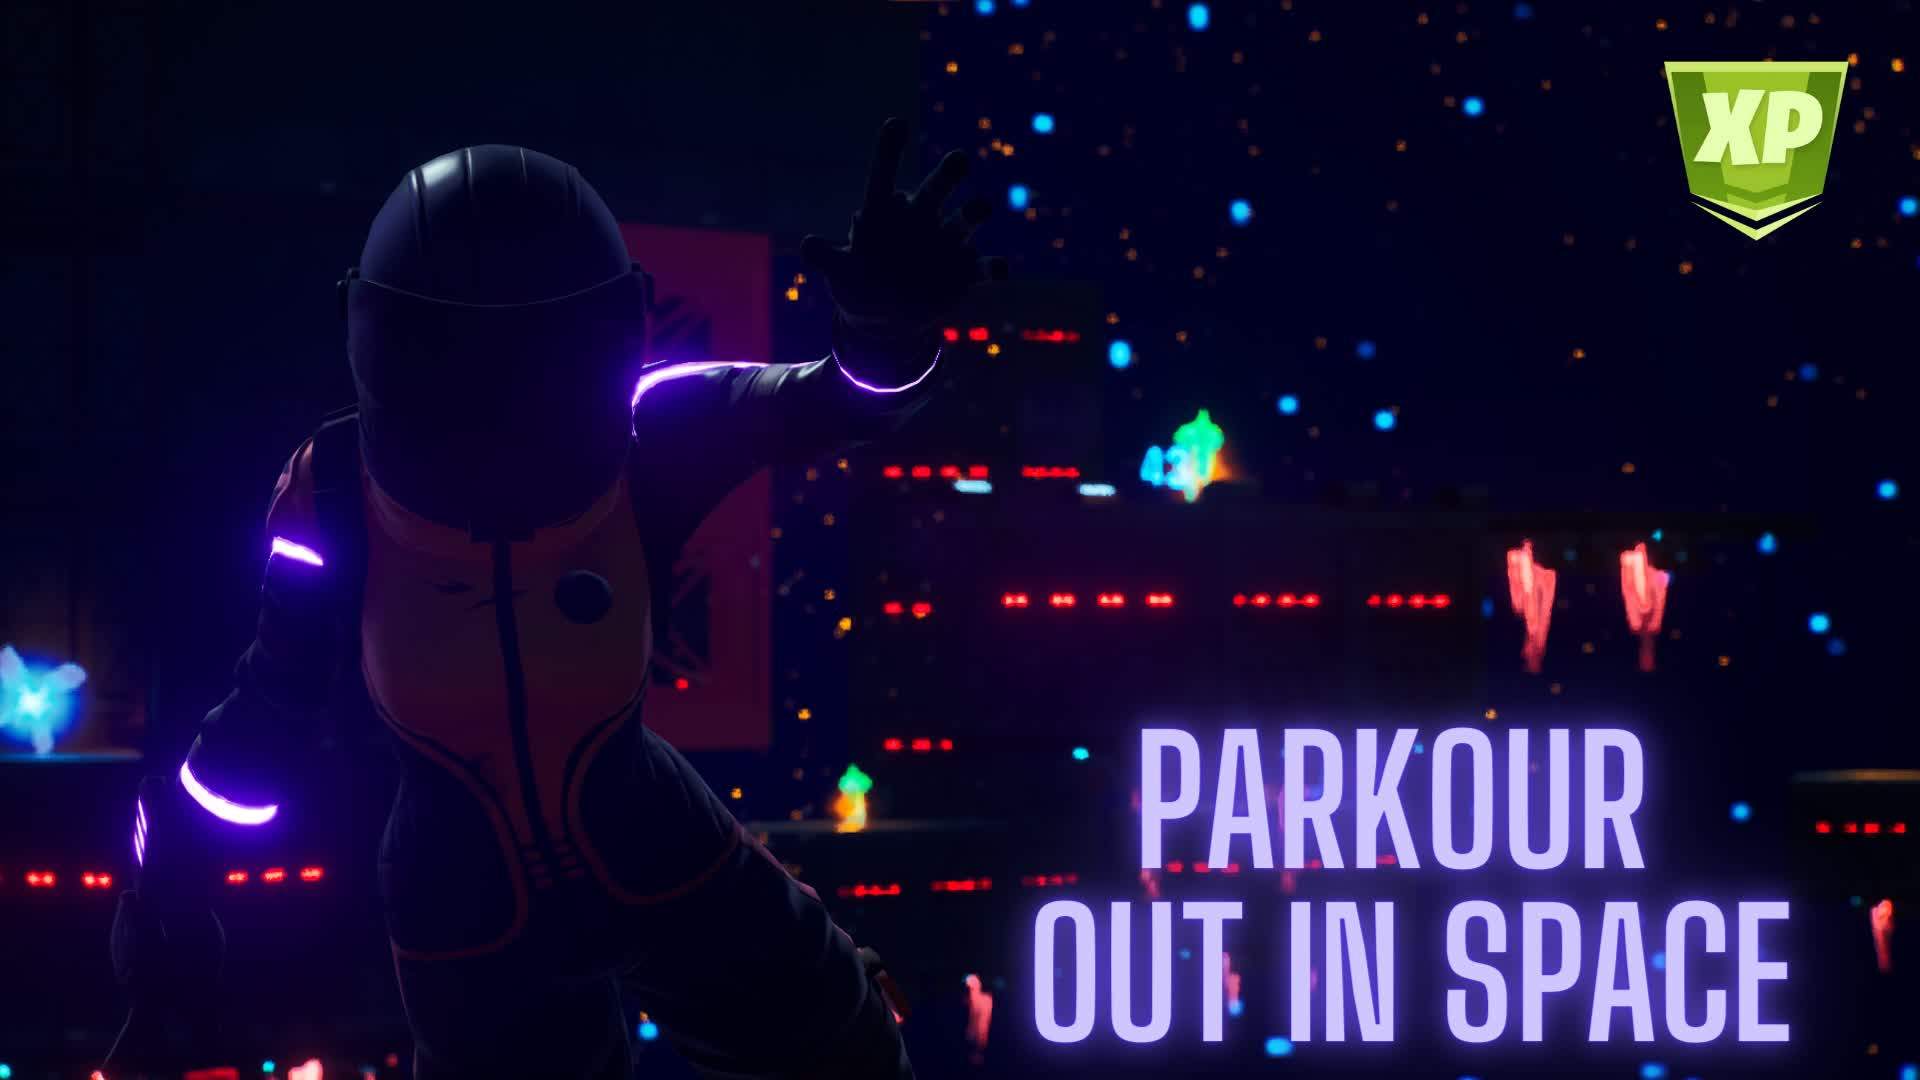 🧗 PARKOUR - OUT IN SPACE 🛸